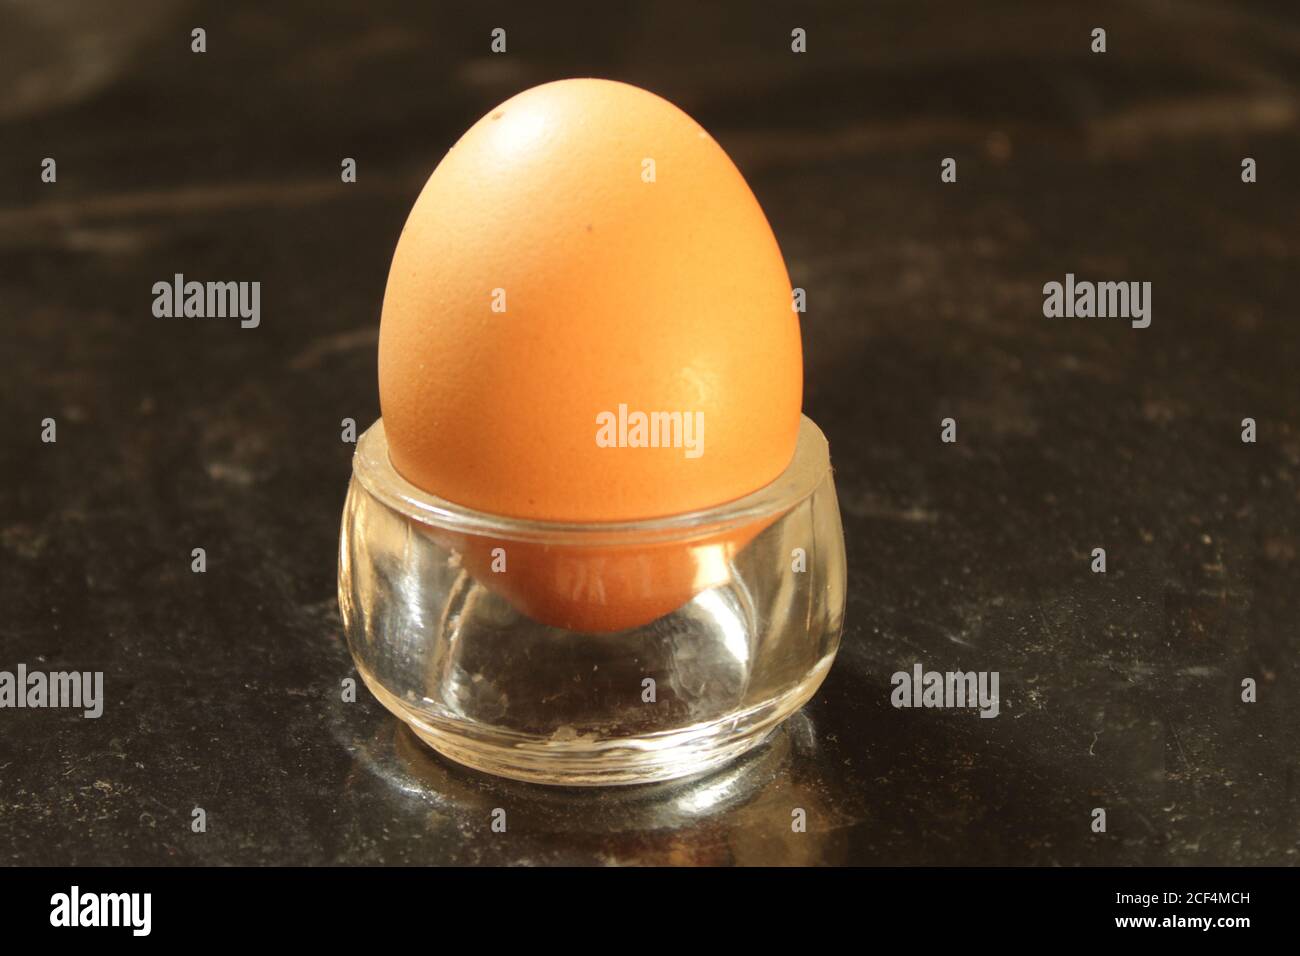 Chicken egg in a glass holder on a black background Stock Photo